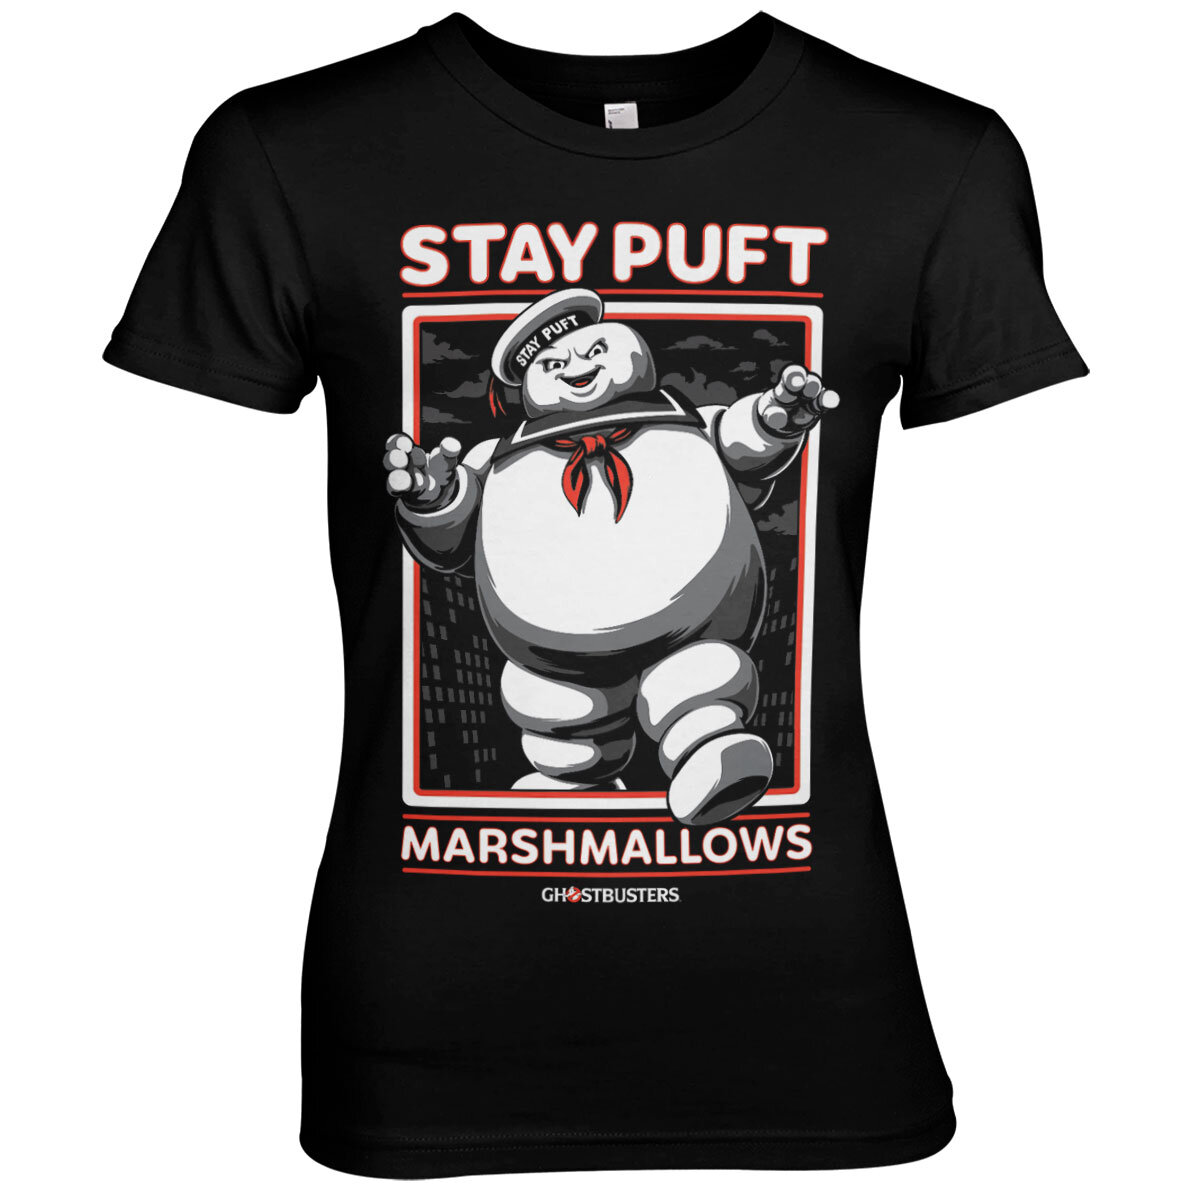 Stay Puft Marshmallows Girly Tee